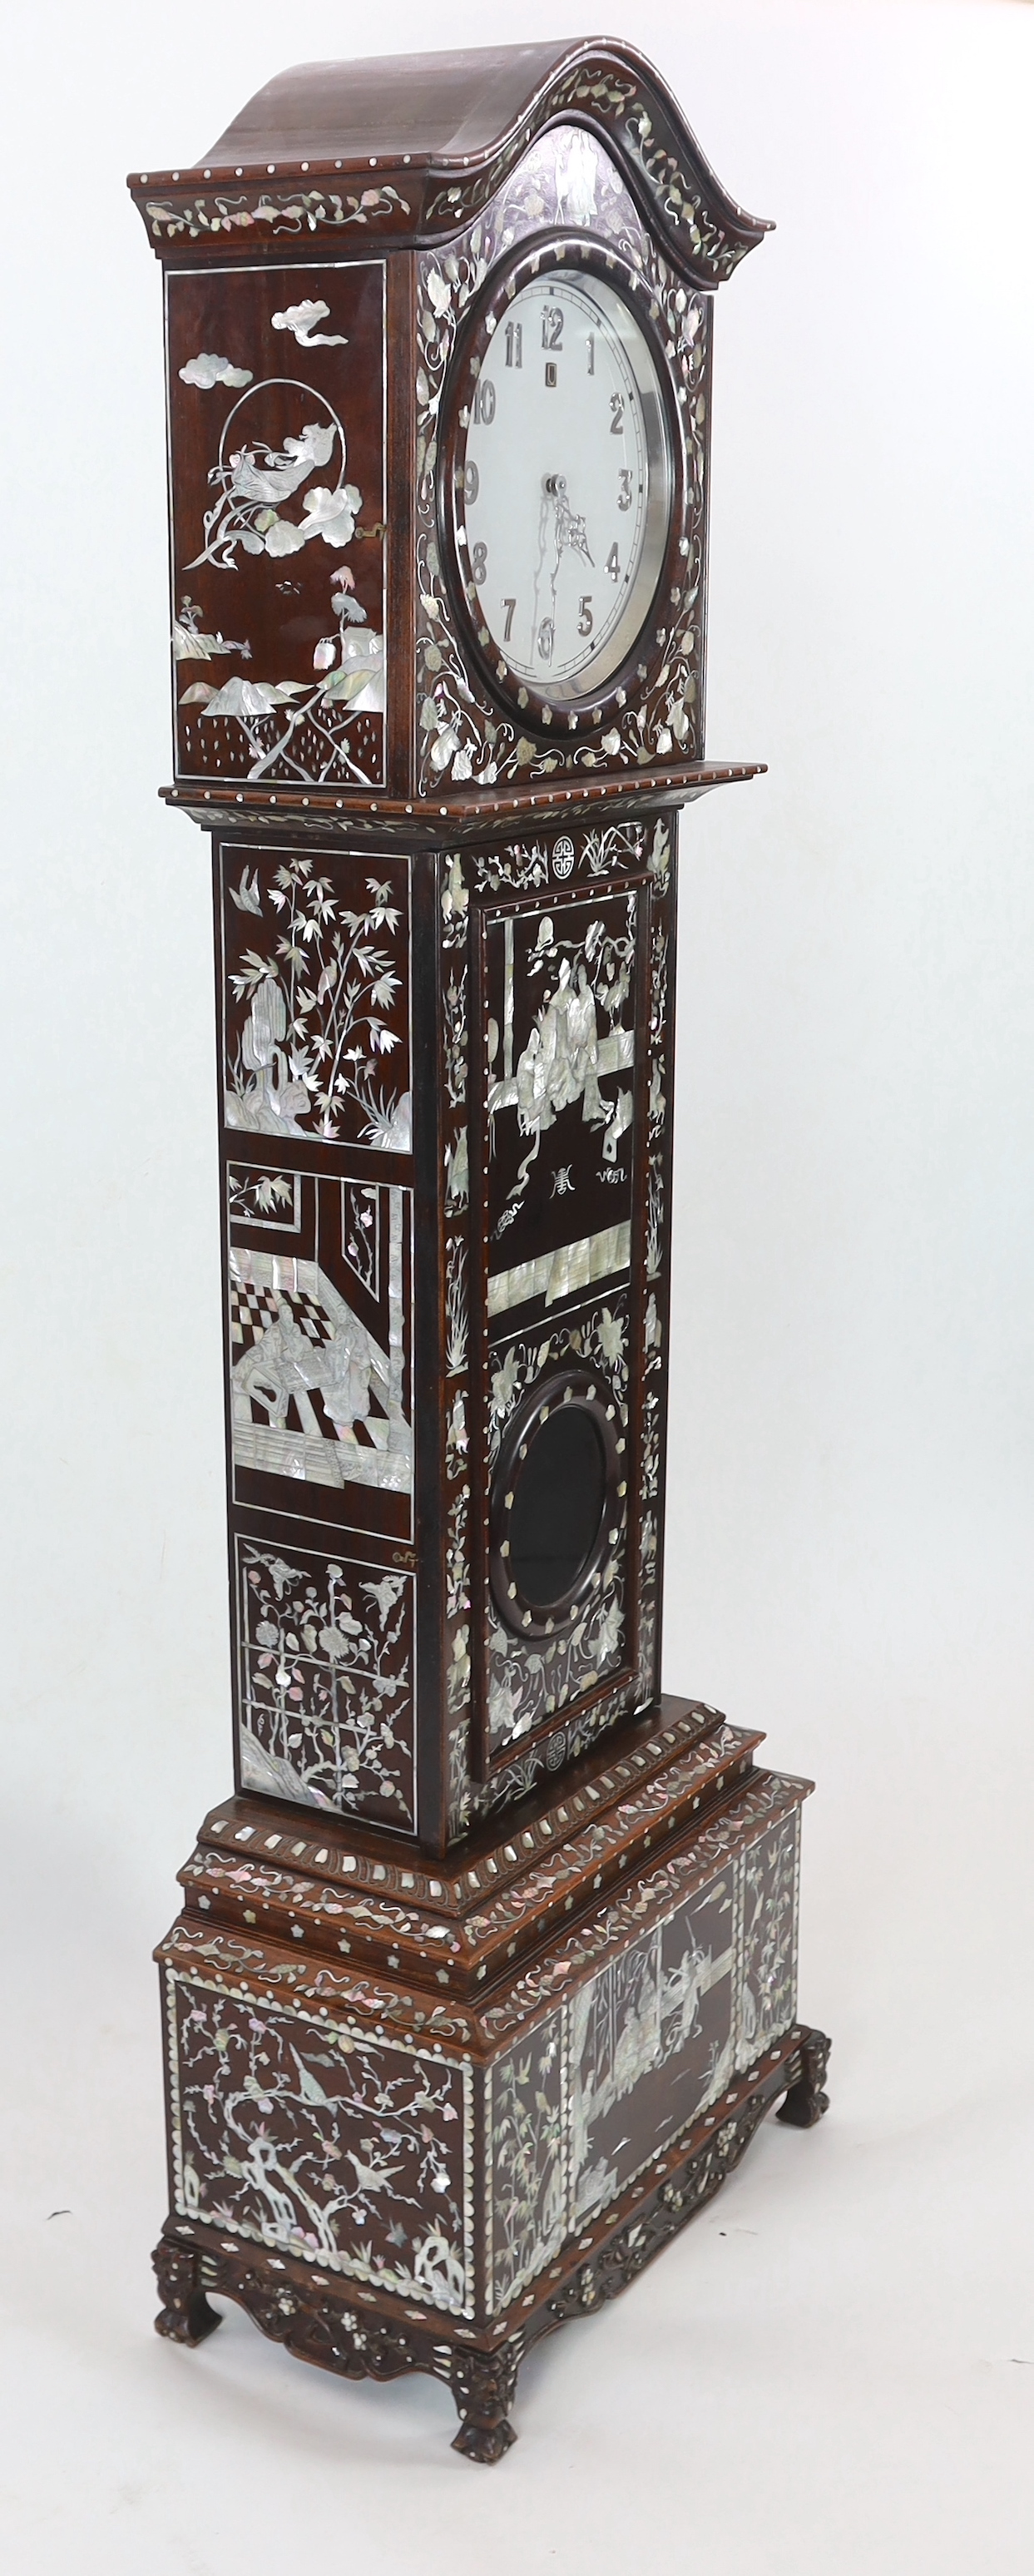 A Chinese hardwood and mother-of-pearl inlaid longcase clock, mid 20th century